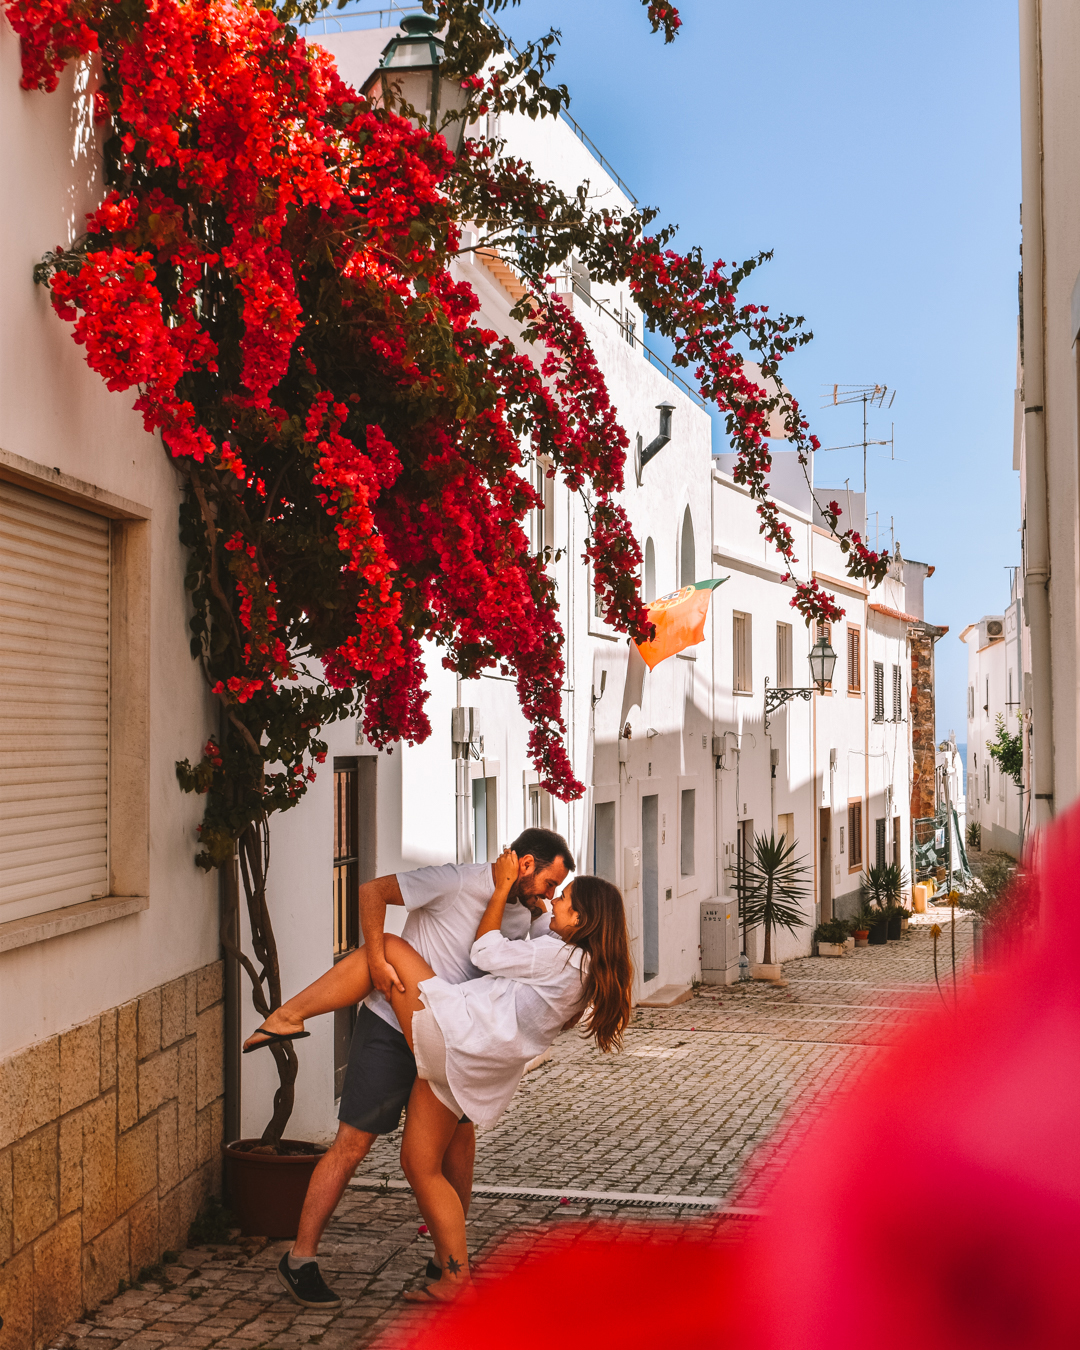 Is Lagos or Albufeira better? - Albufeira old town.